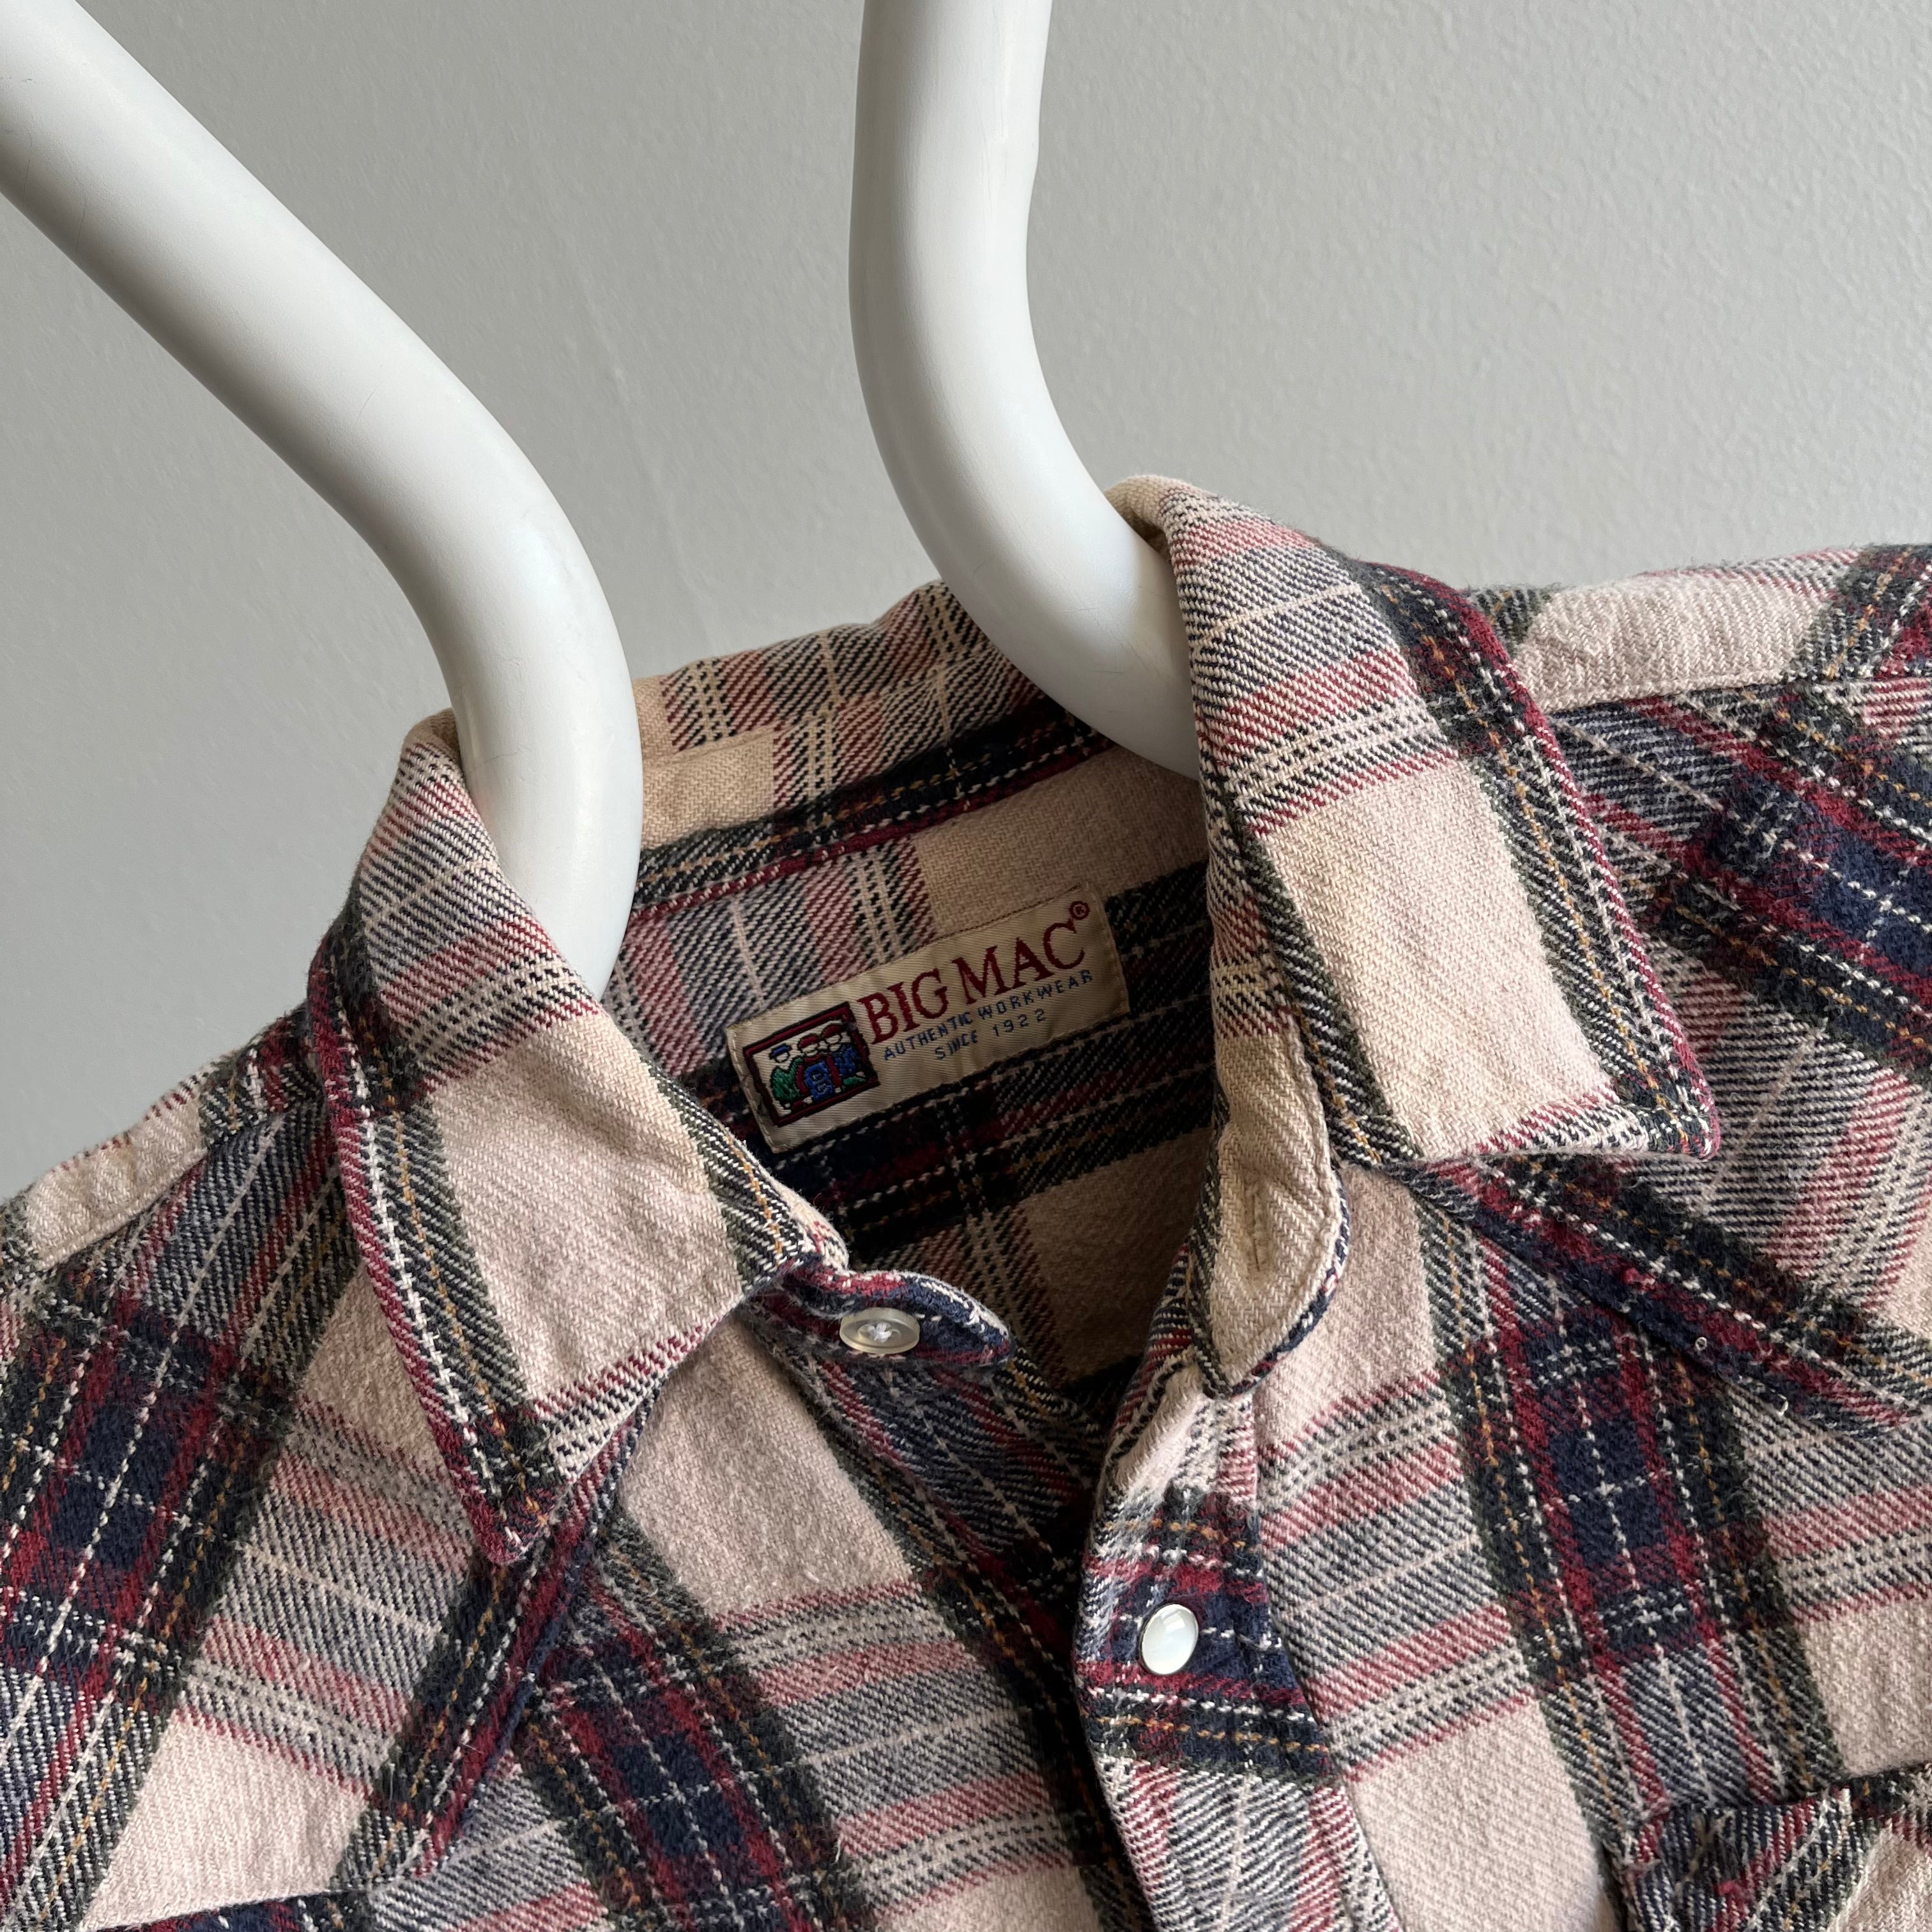 1990s/2000s Cowboy Snap Front Flannel